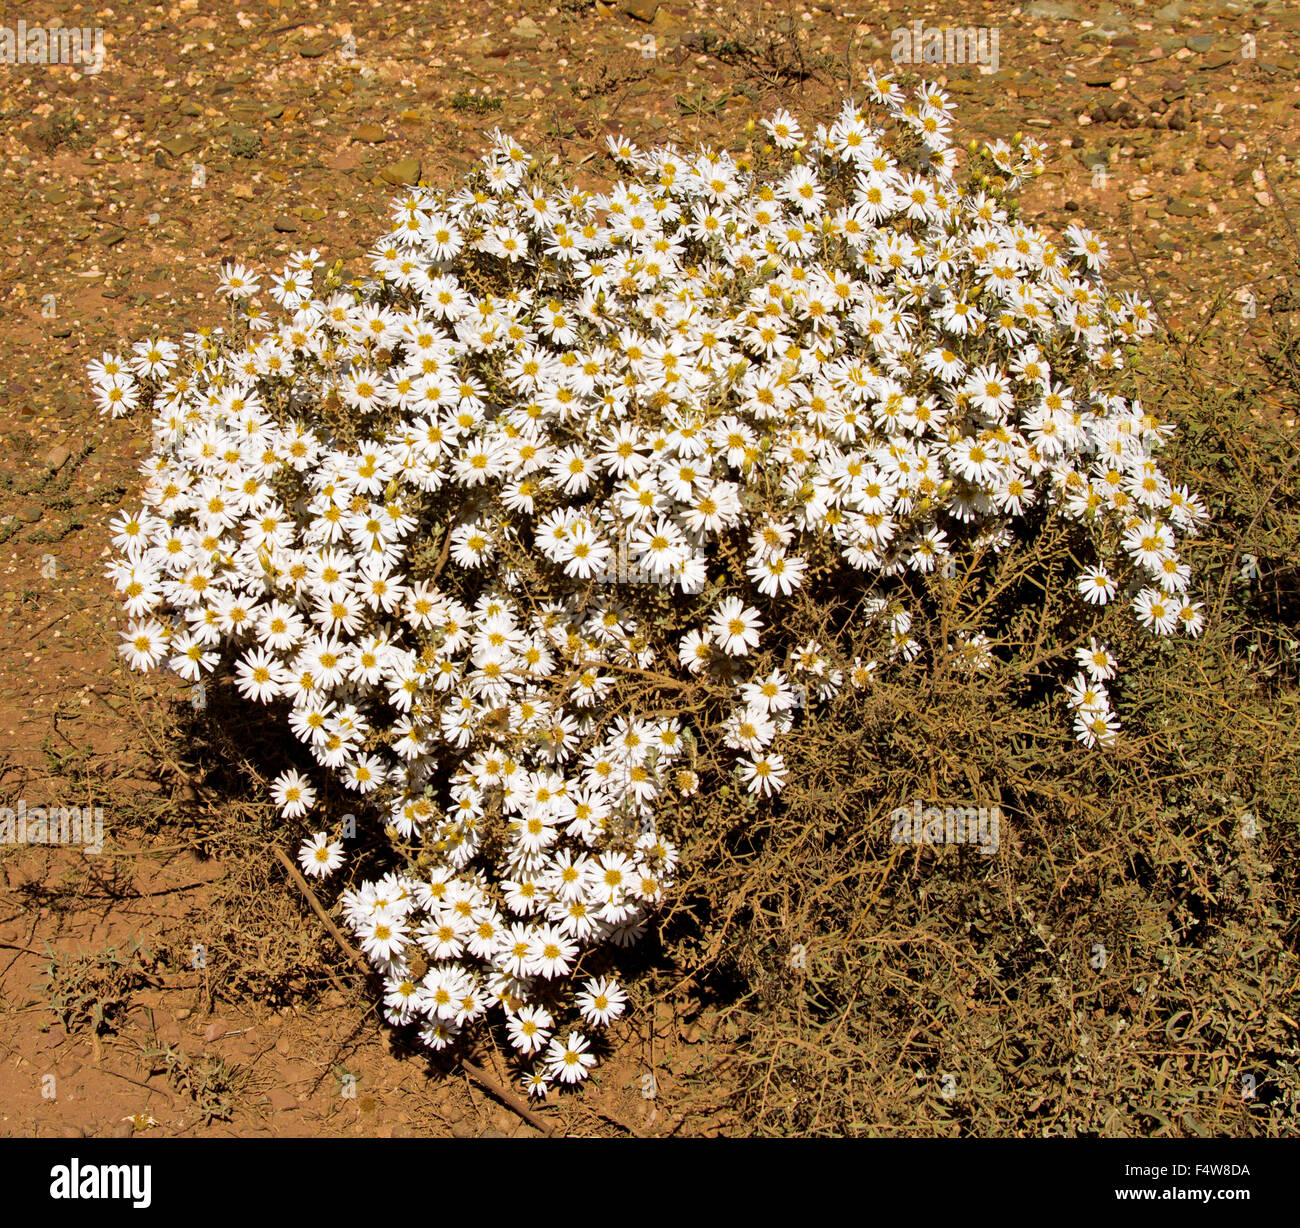 Shrub with mass of wildflowers, white daisies of Olearia pimeleoides, mallee daisy bush growing in outback South Australia Stock Photo